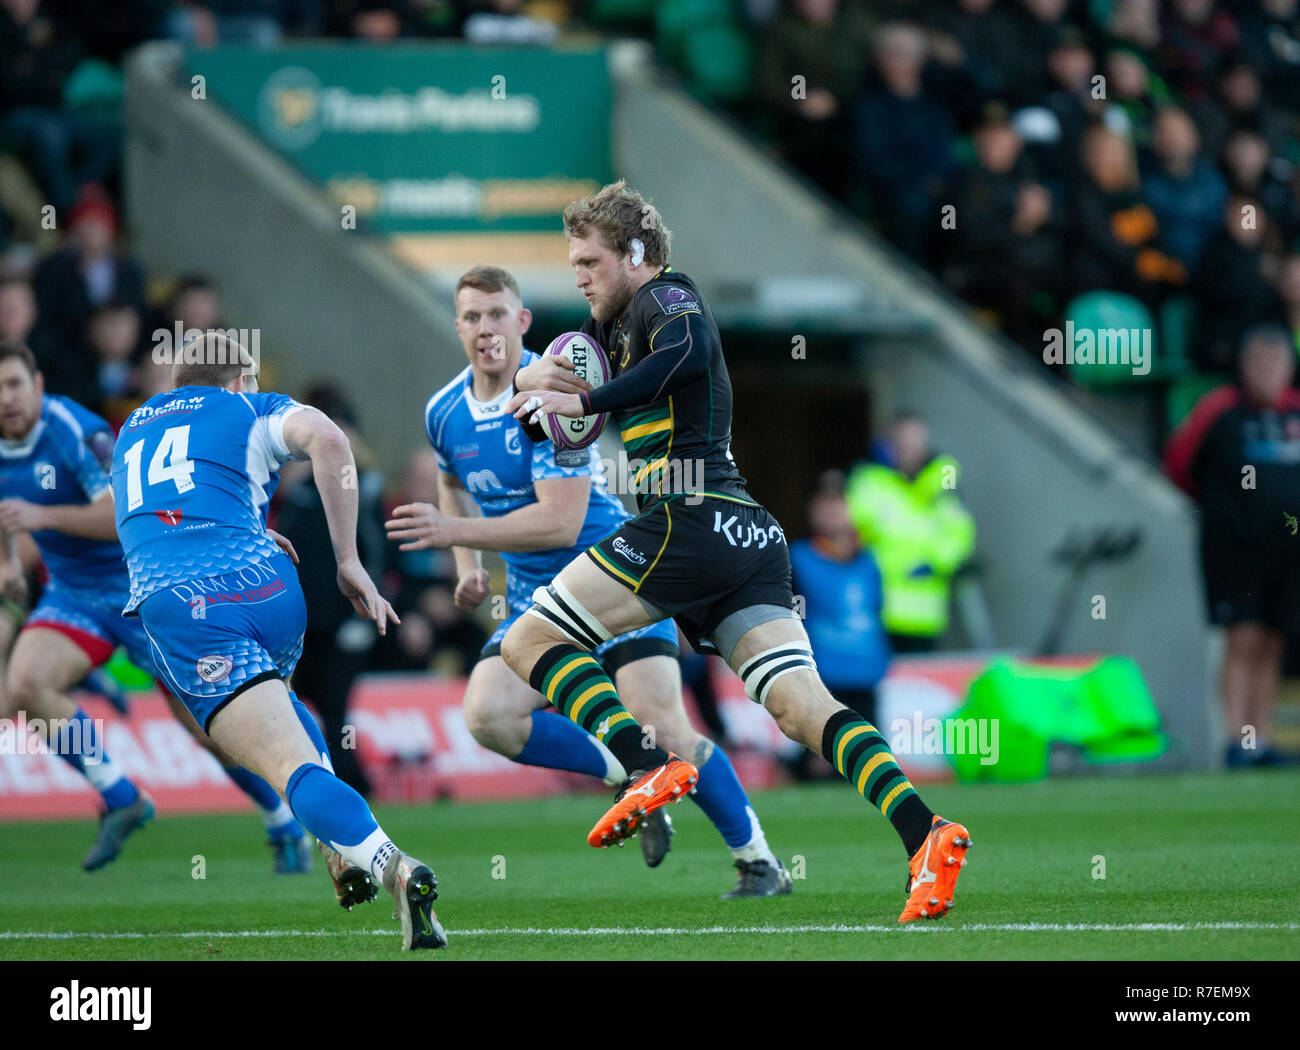 Northampton, UK. 8th December 2018. Jamie Gibson of Northampton Saints runs with the ball during the European Rugby Challenge Cup match between Northampton Saints and Dragons. Andrew Taylor/Alamy Live News Stock Photo